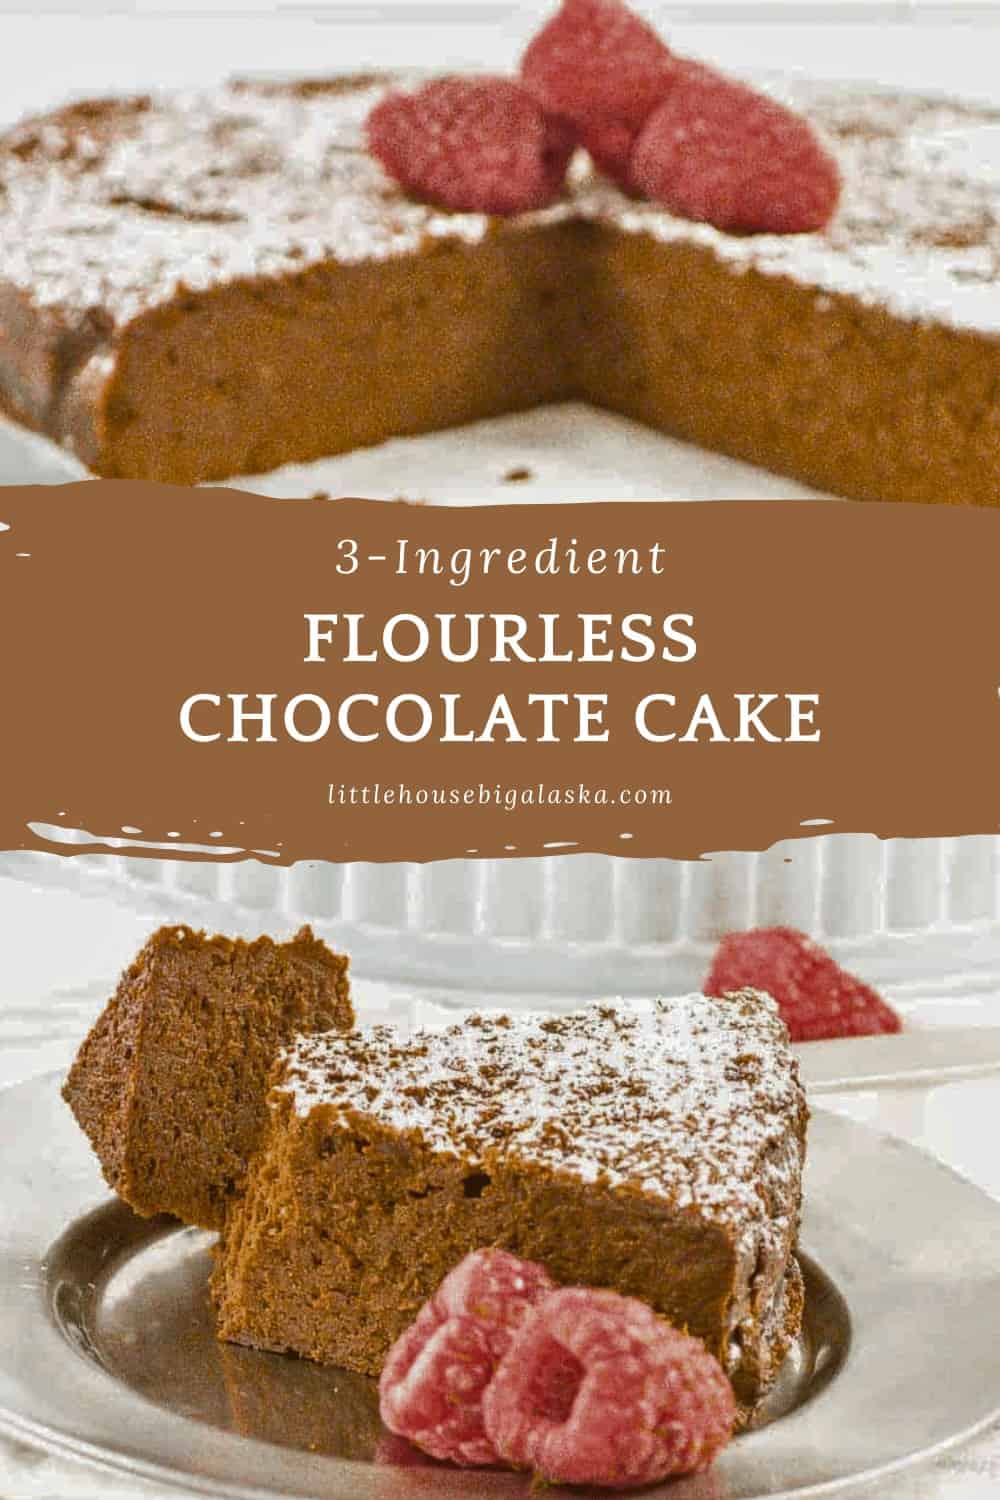 Pin graphic for flourless chocolate cake.